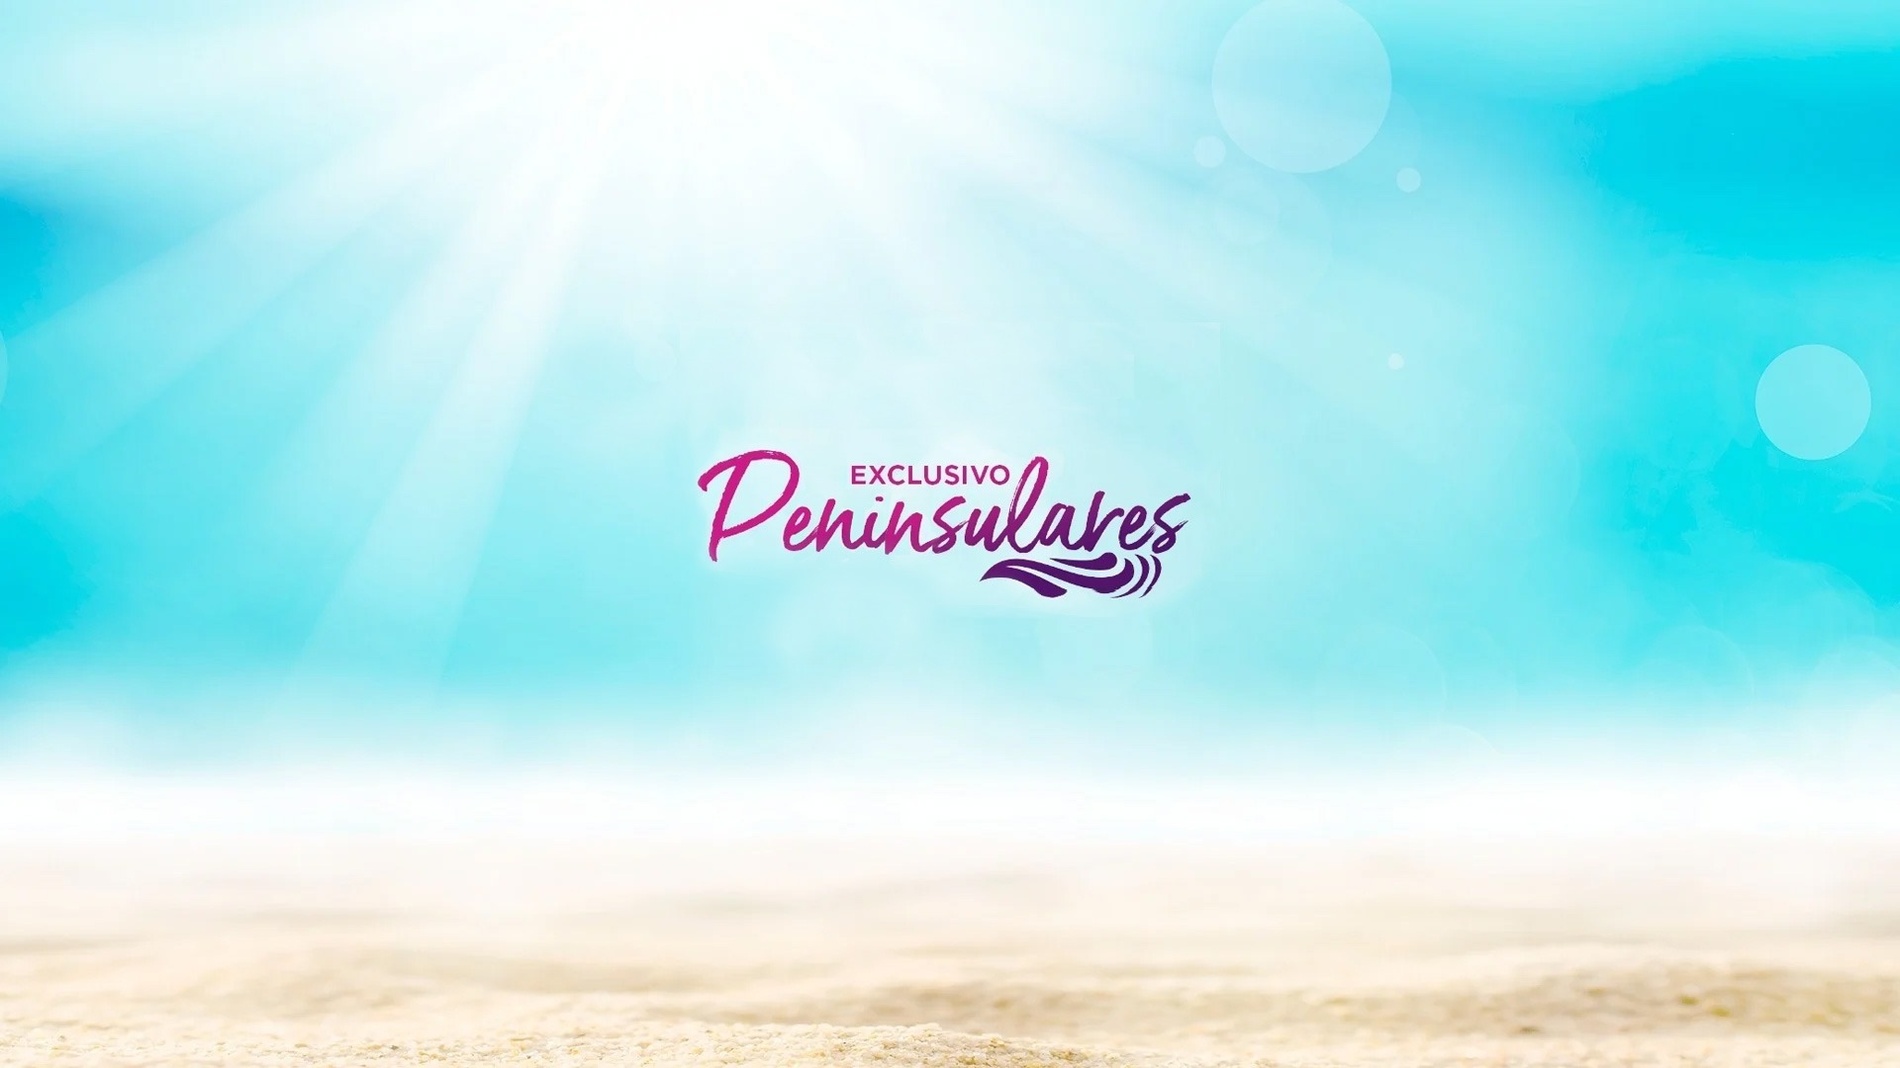 the word peninsulares is on a blue background